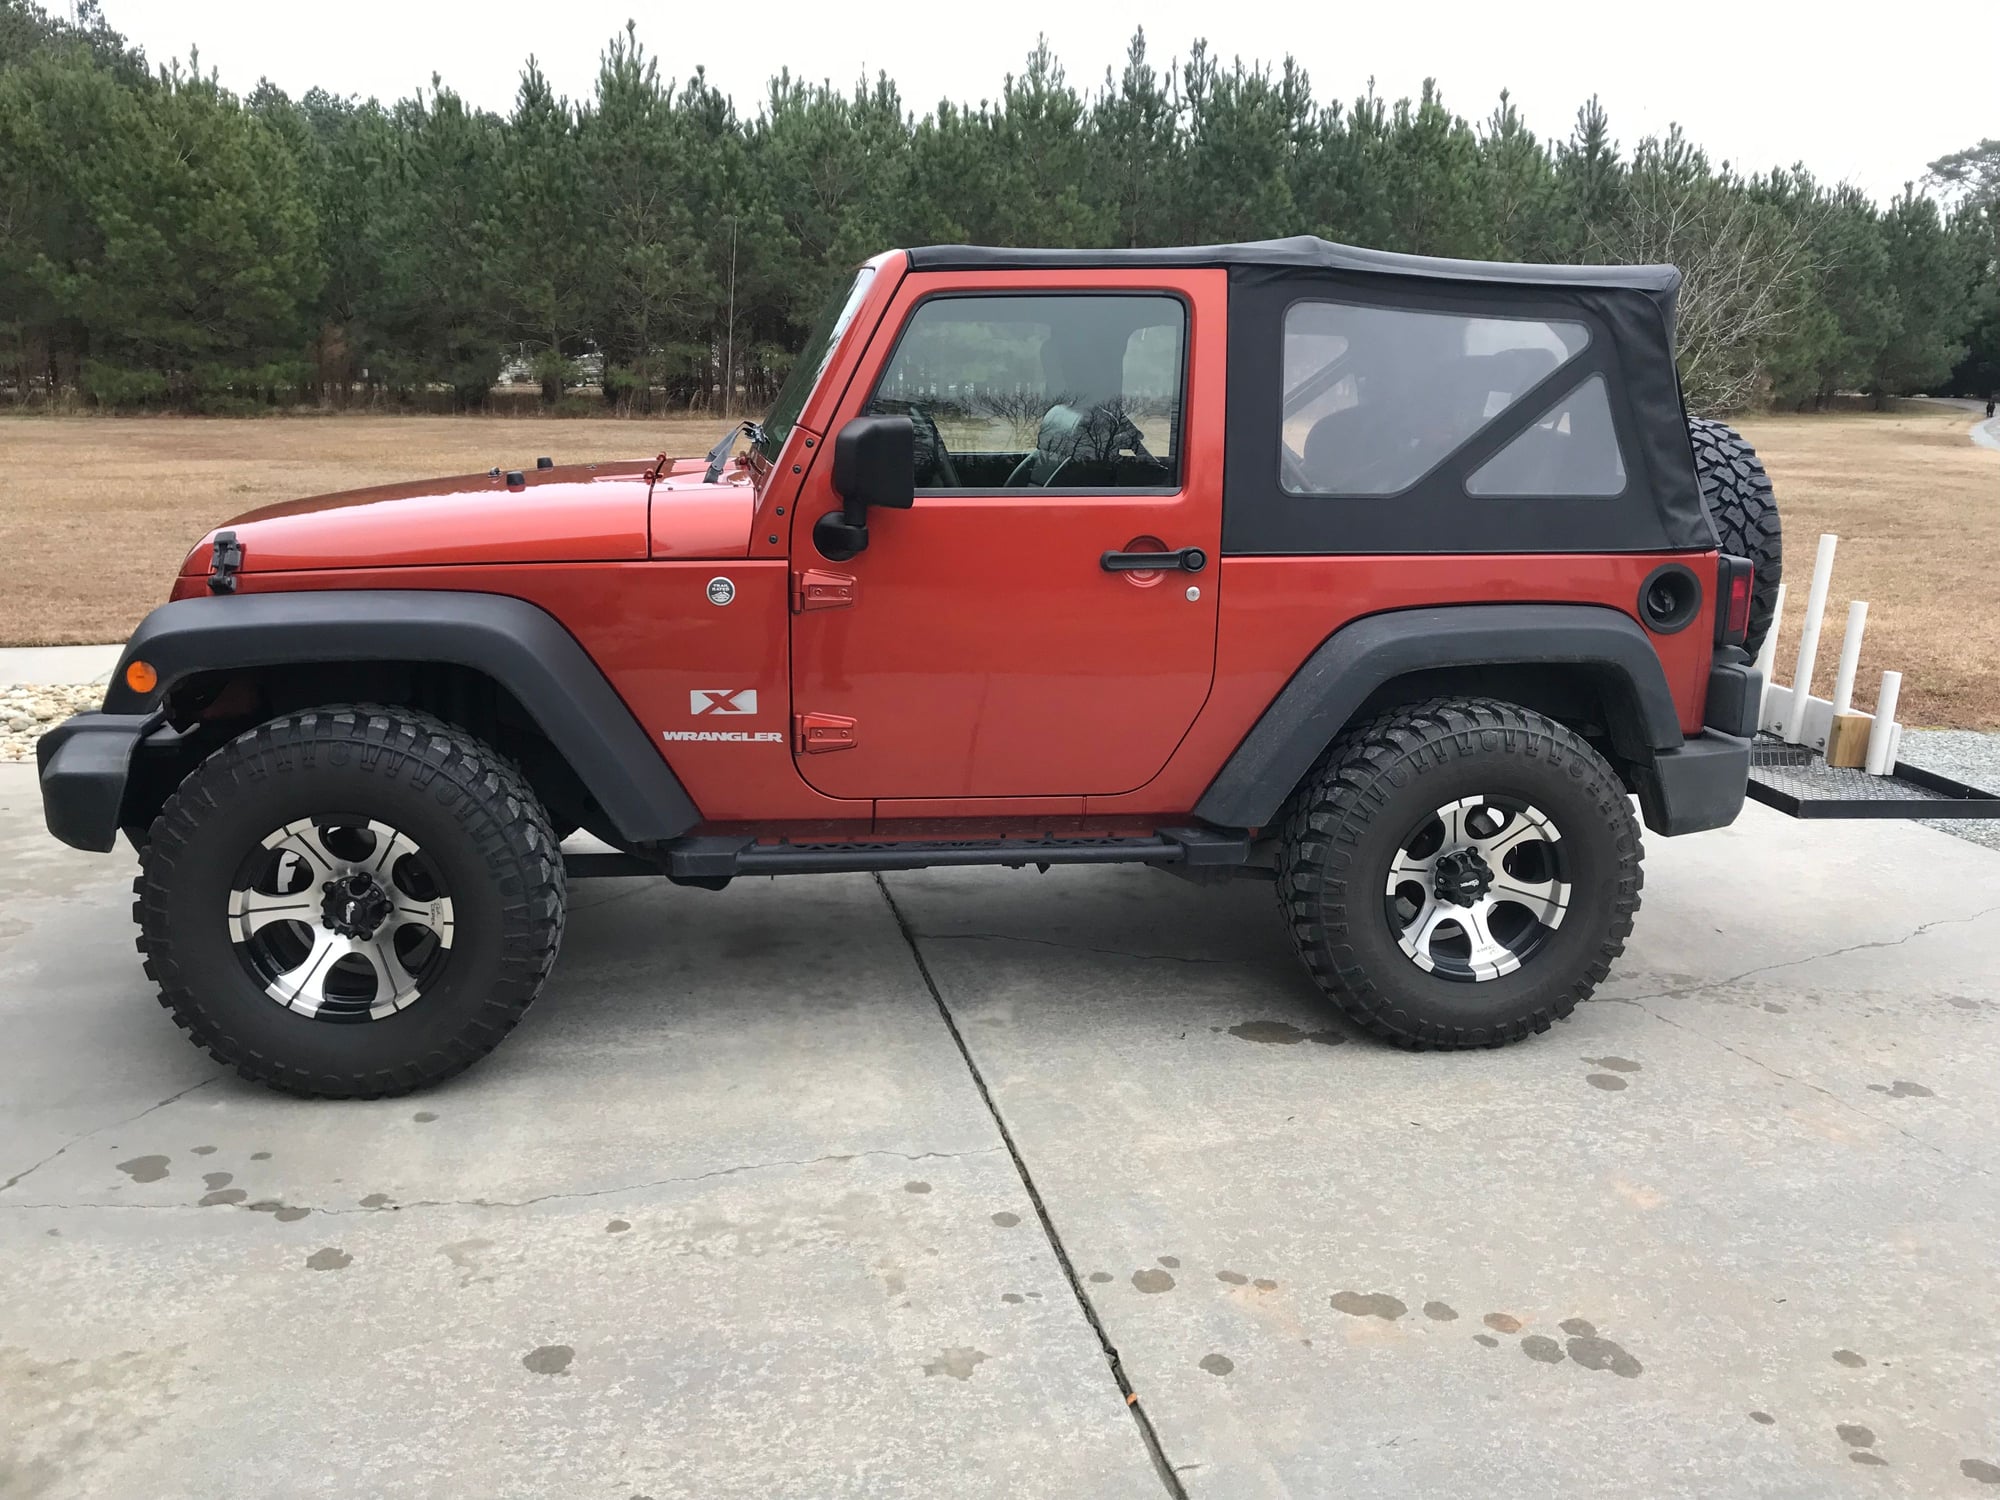 2009 Jeep Wrangler - The Hull Truth - Boating and Fishing Forum